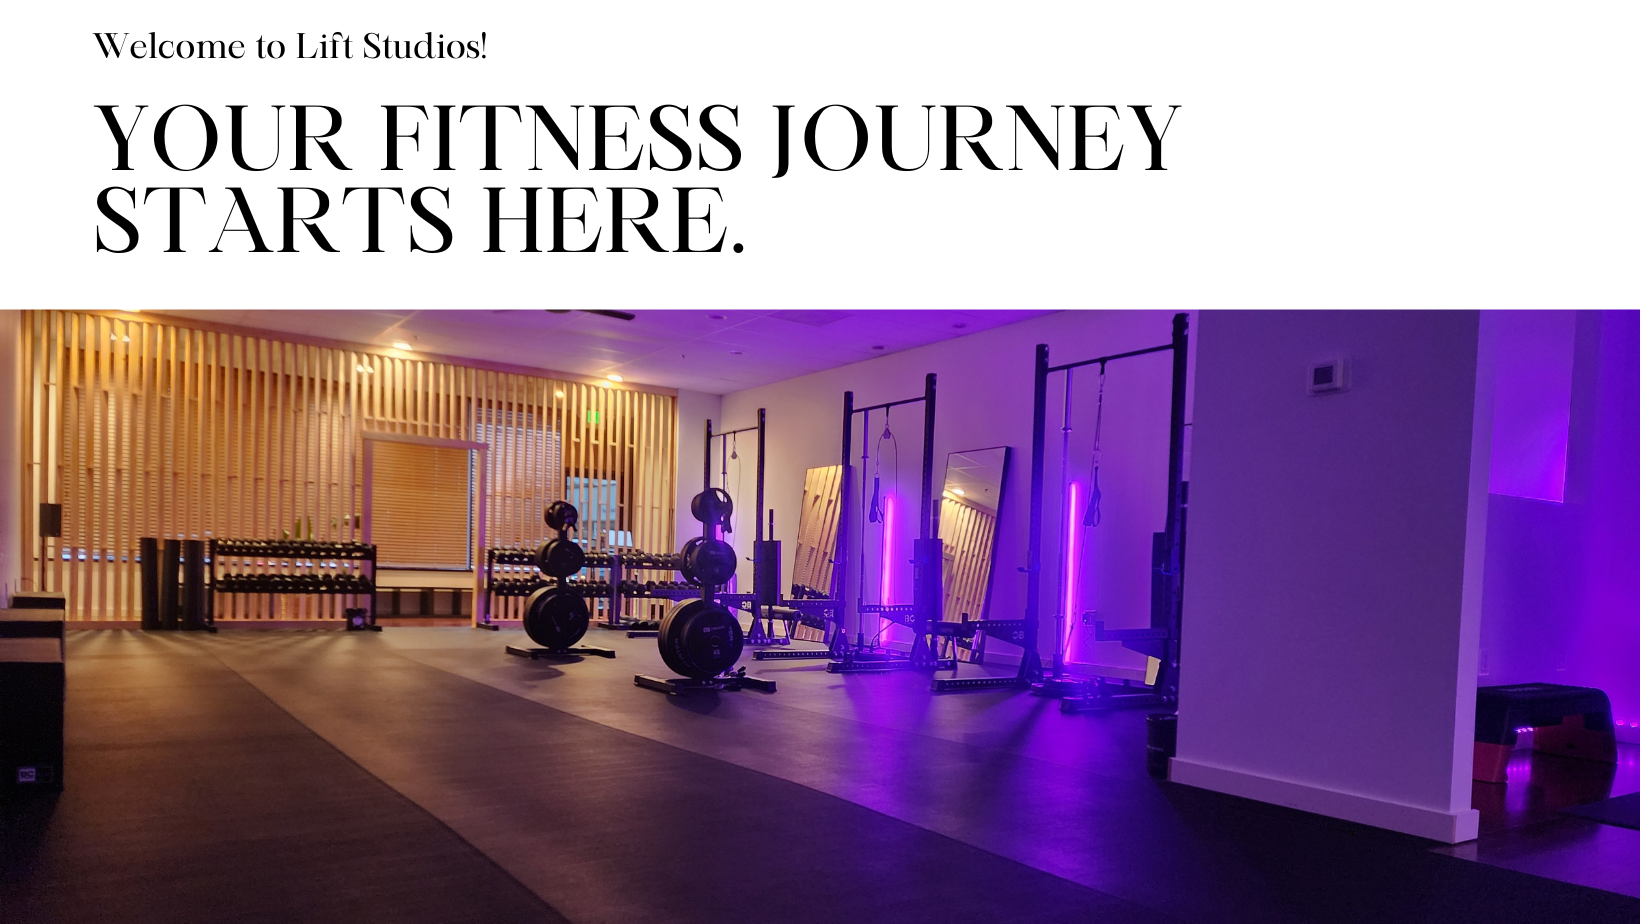 Your fitness journey starts here.